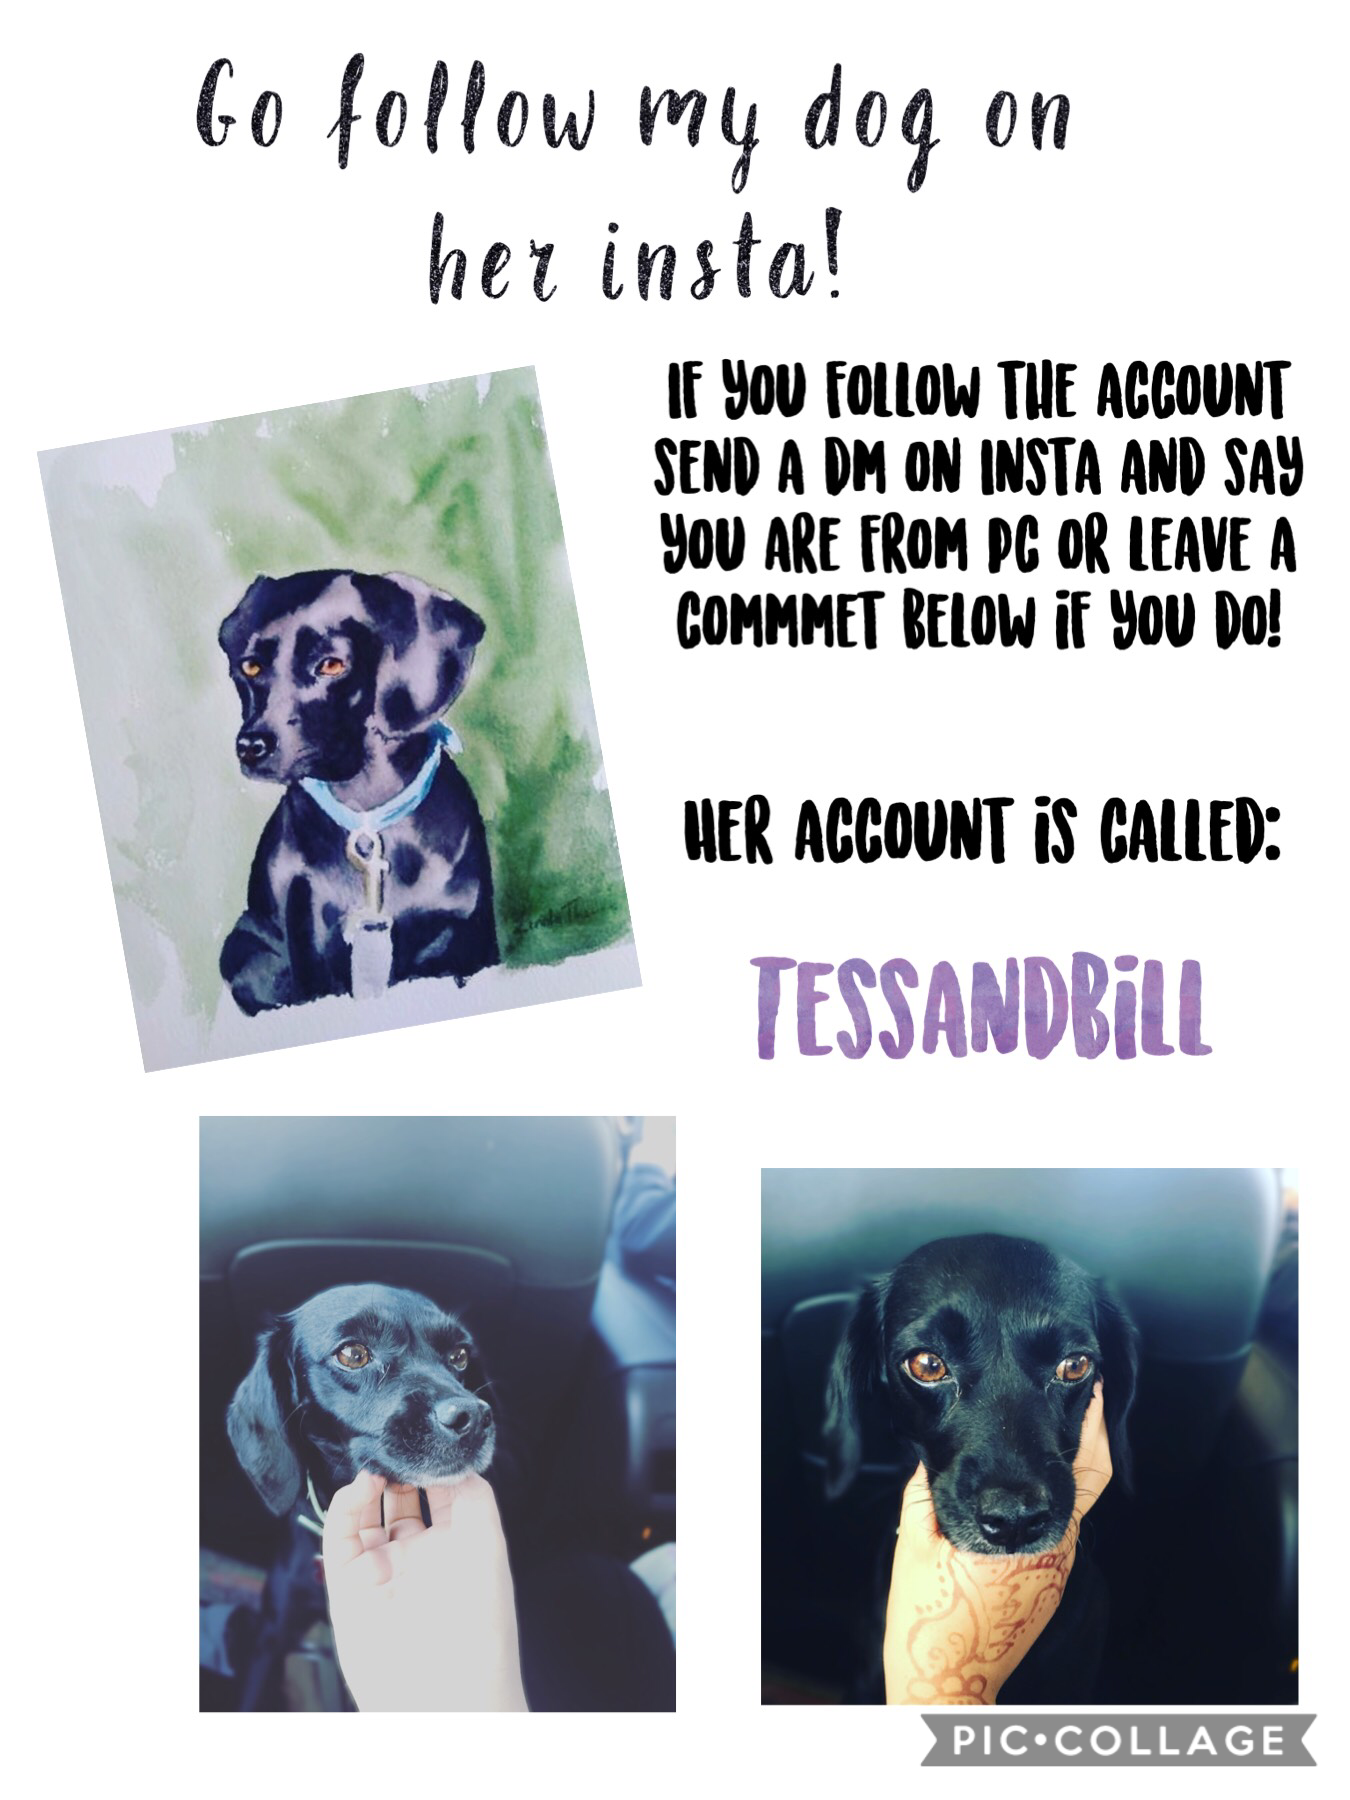 Thx so much if you follow her, plz let me know if you do so I can thank you. This account is called TESSANDBILL (it is called tesa and bill because my dog is called Tessa and it sometimes shows my cat who is called Billie!) plz don’t hesitate to ask more 